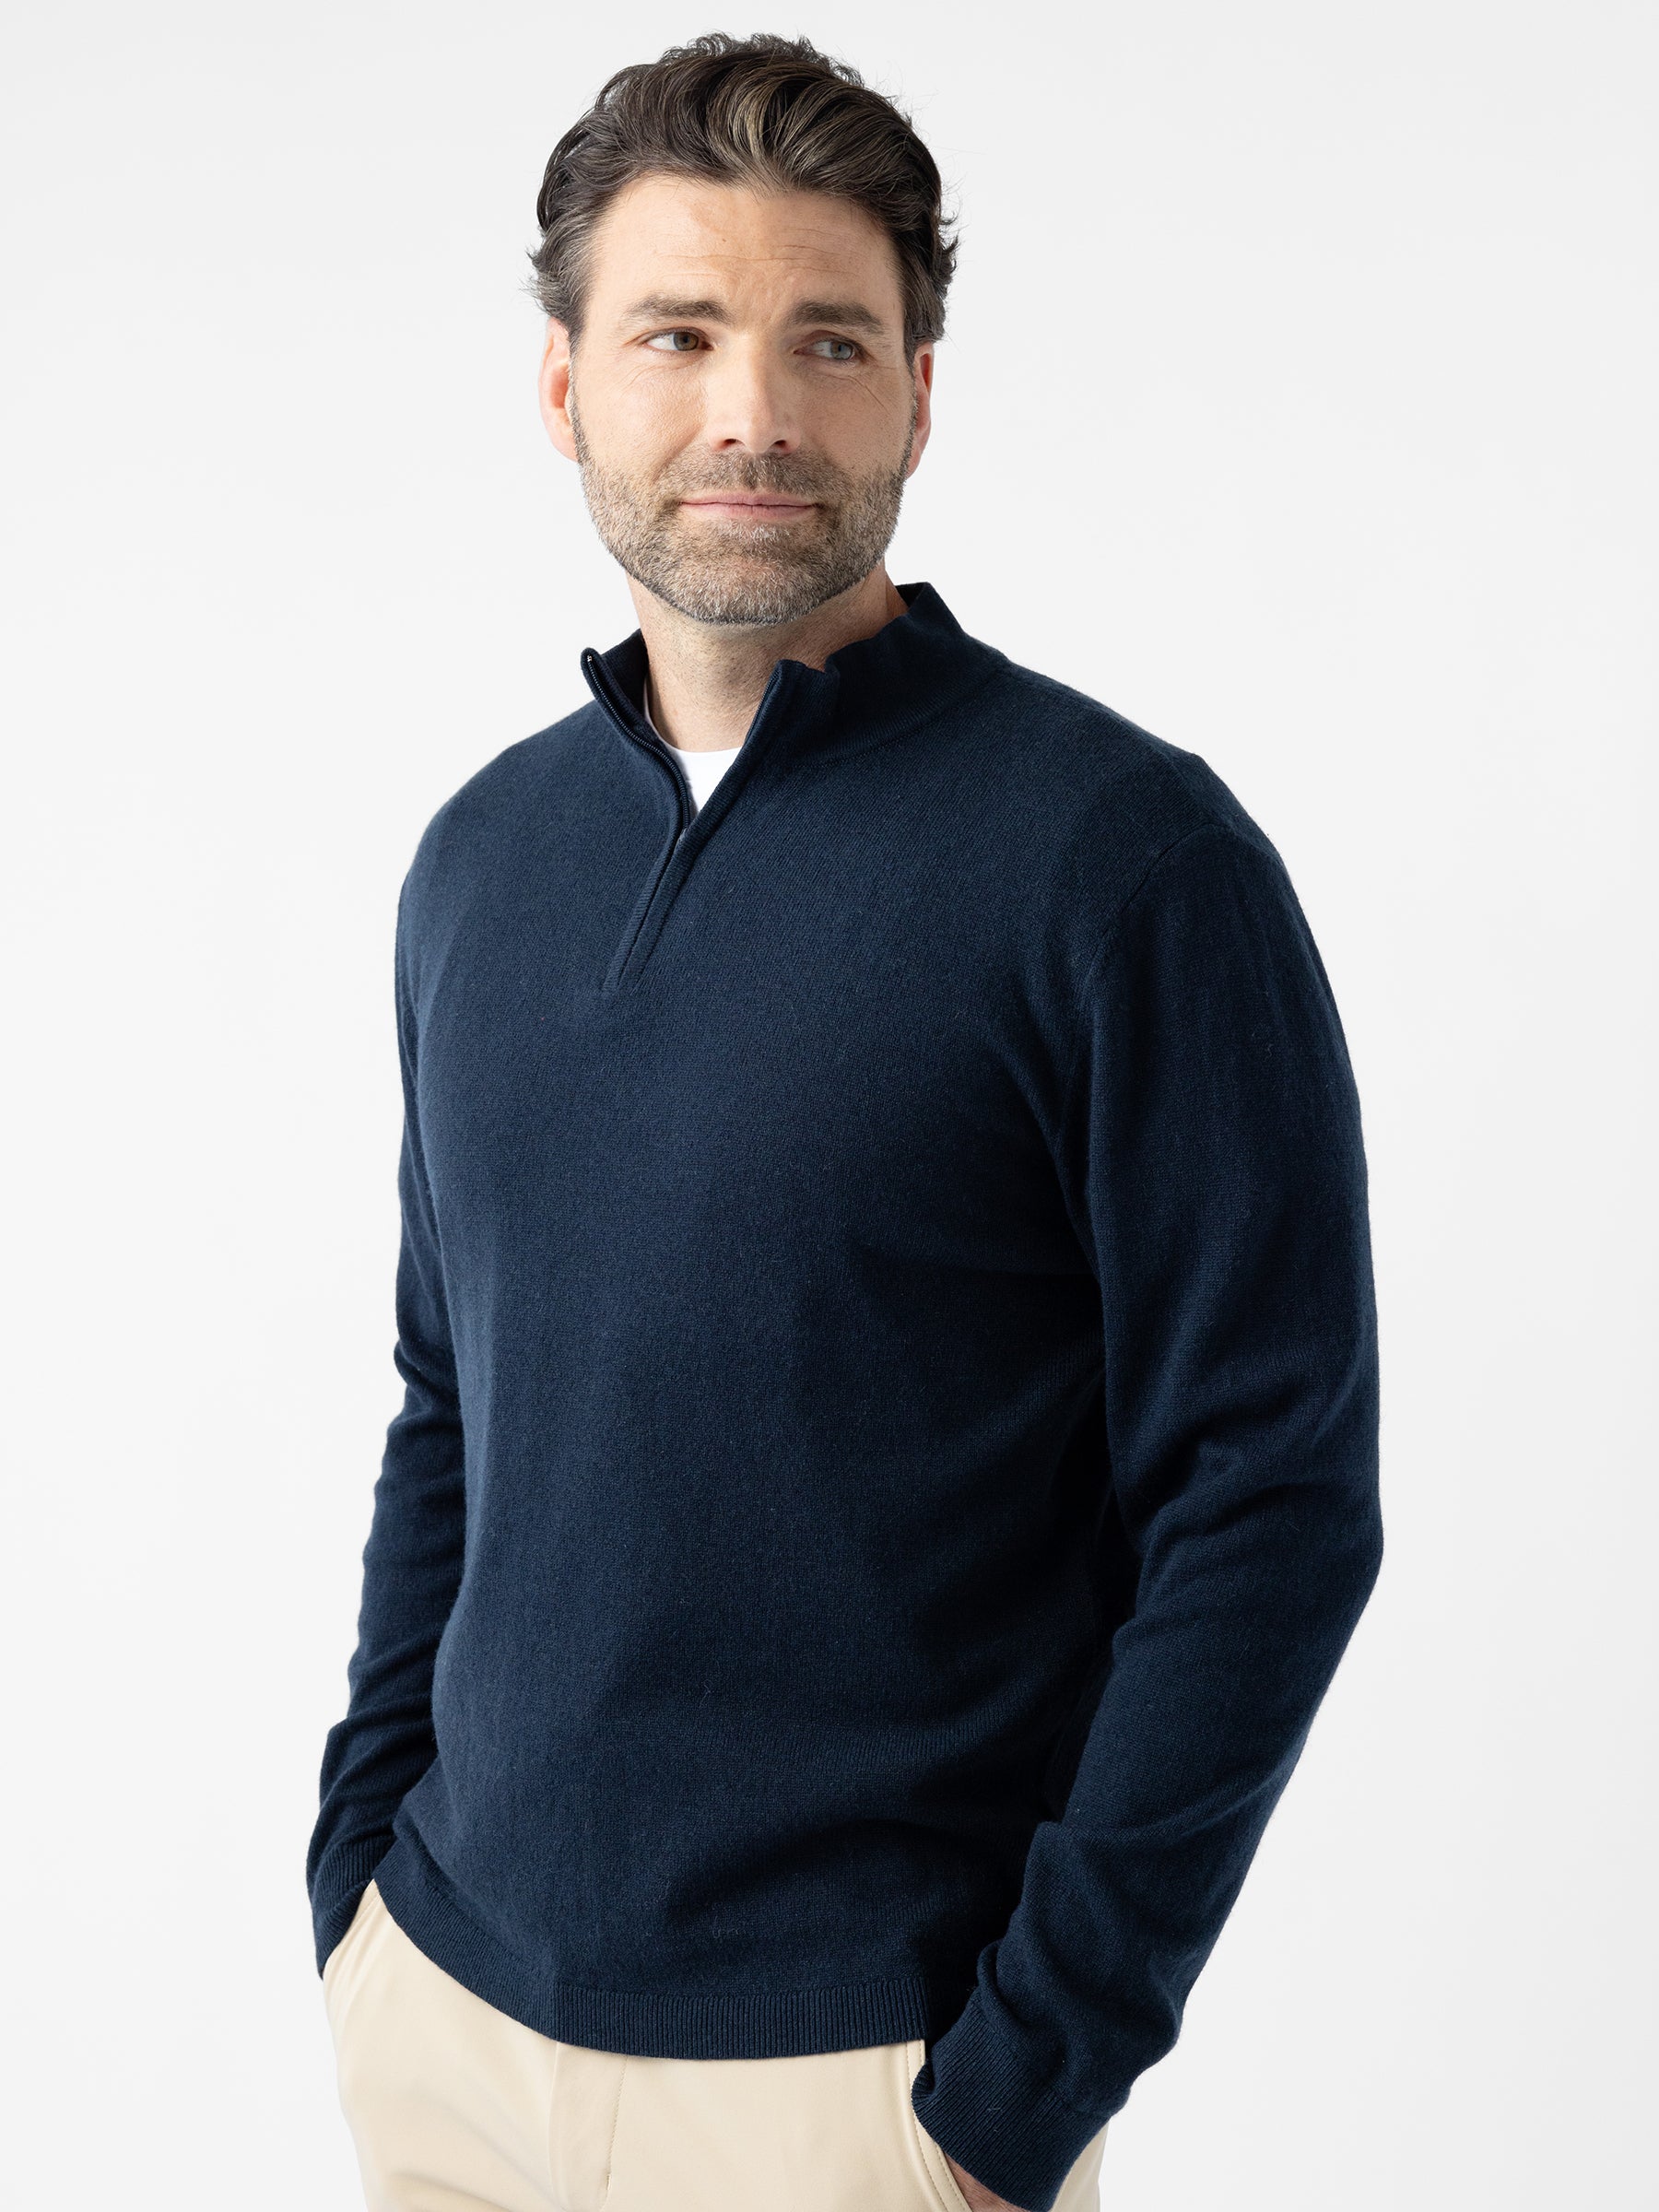 A man with dark hair and a short beard is wearing a navy blue Men's Quarter Zip Sweater from Cozy Earth paired with beige pants. He stands with his hands in his pockets against a plain white background, looking to his right with a slight smile. |Color:Eclipse